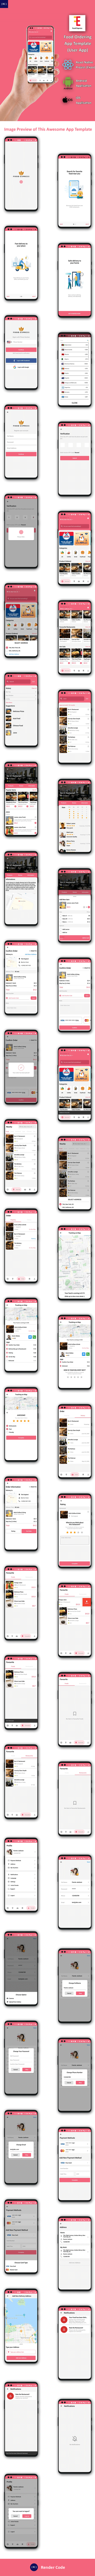 Food Ordering App Template in React Native | 2 Apps | User App + Delivery Boy App - 7